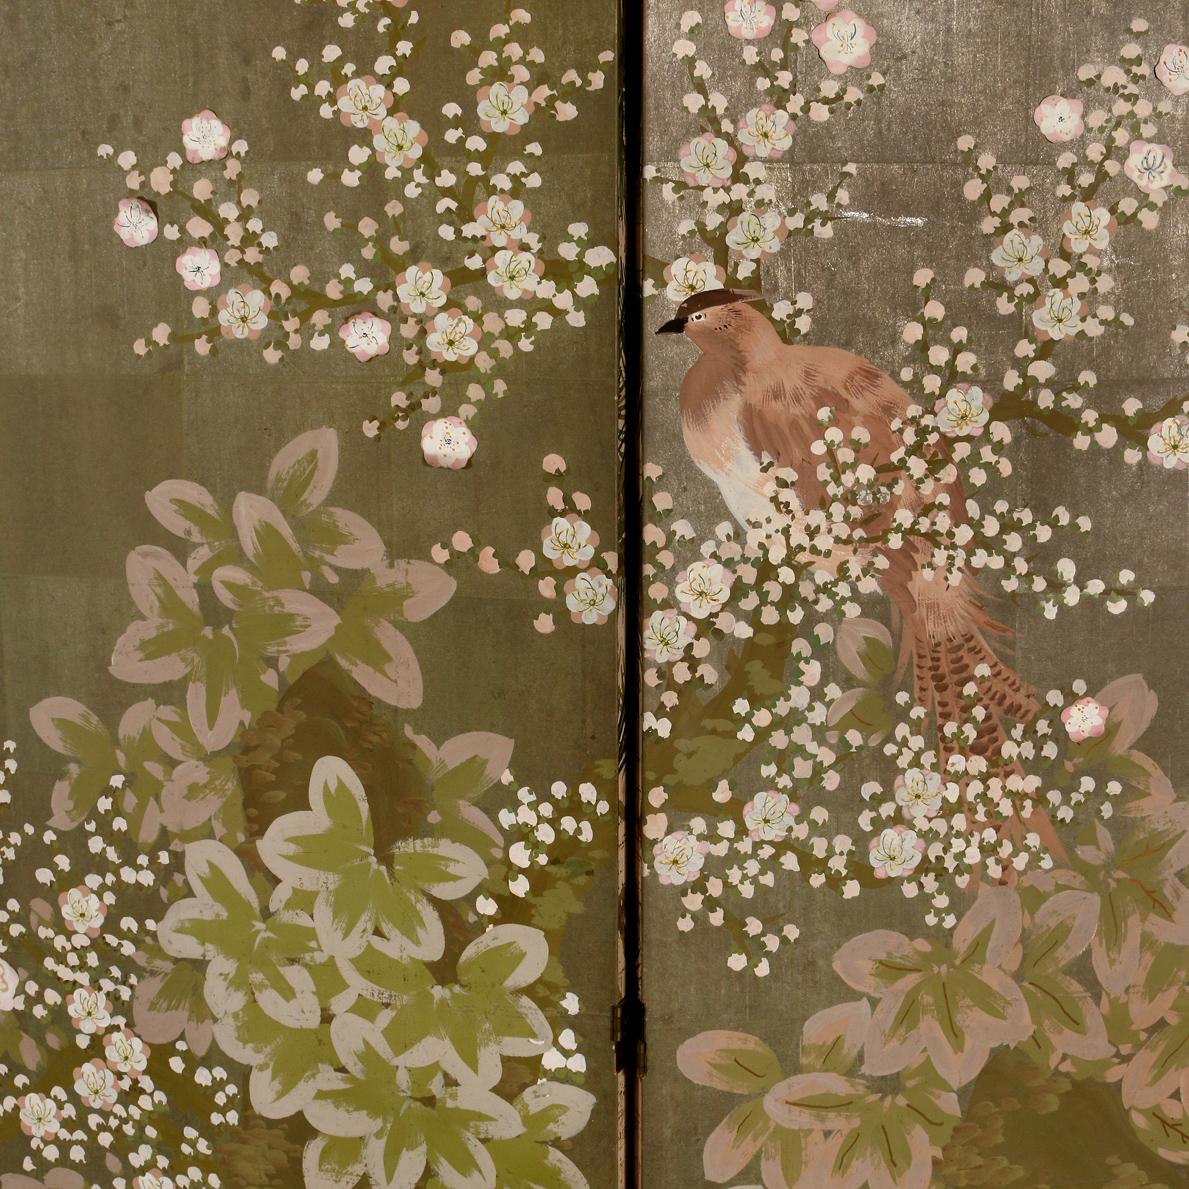 Large six panel, hand painted screen by Robert Crowder depicting branches, flowers and birds.